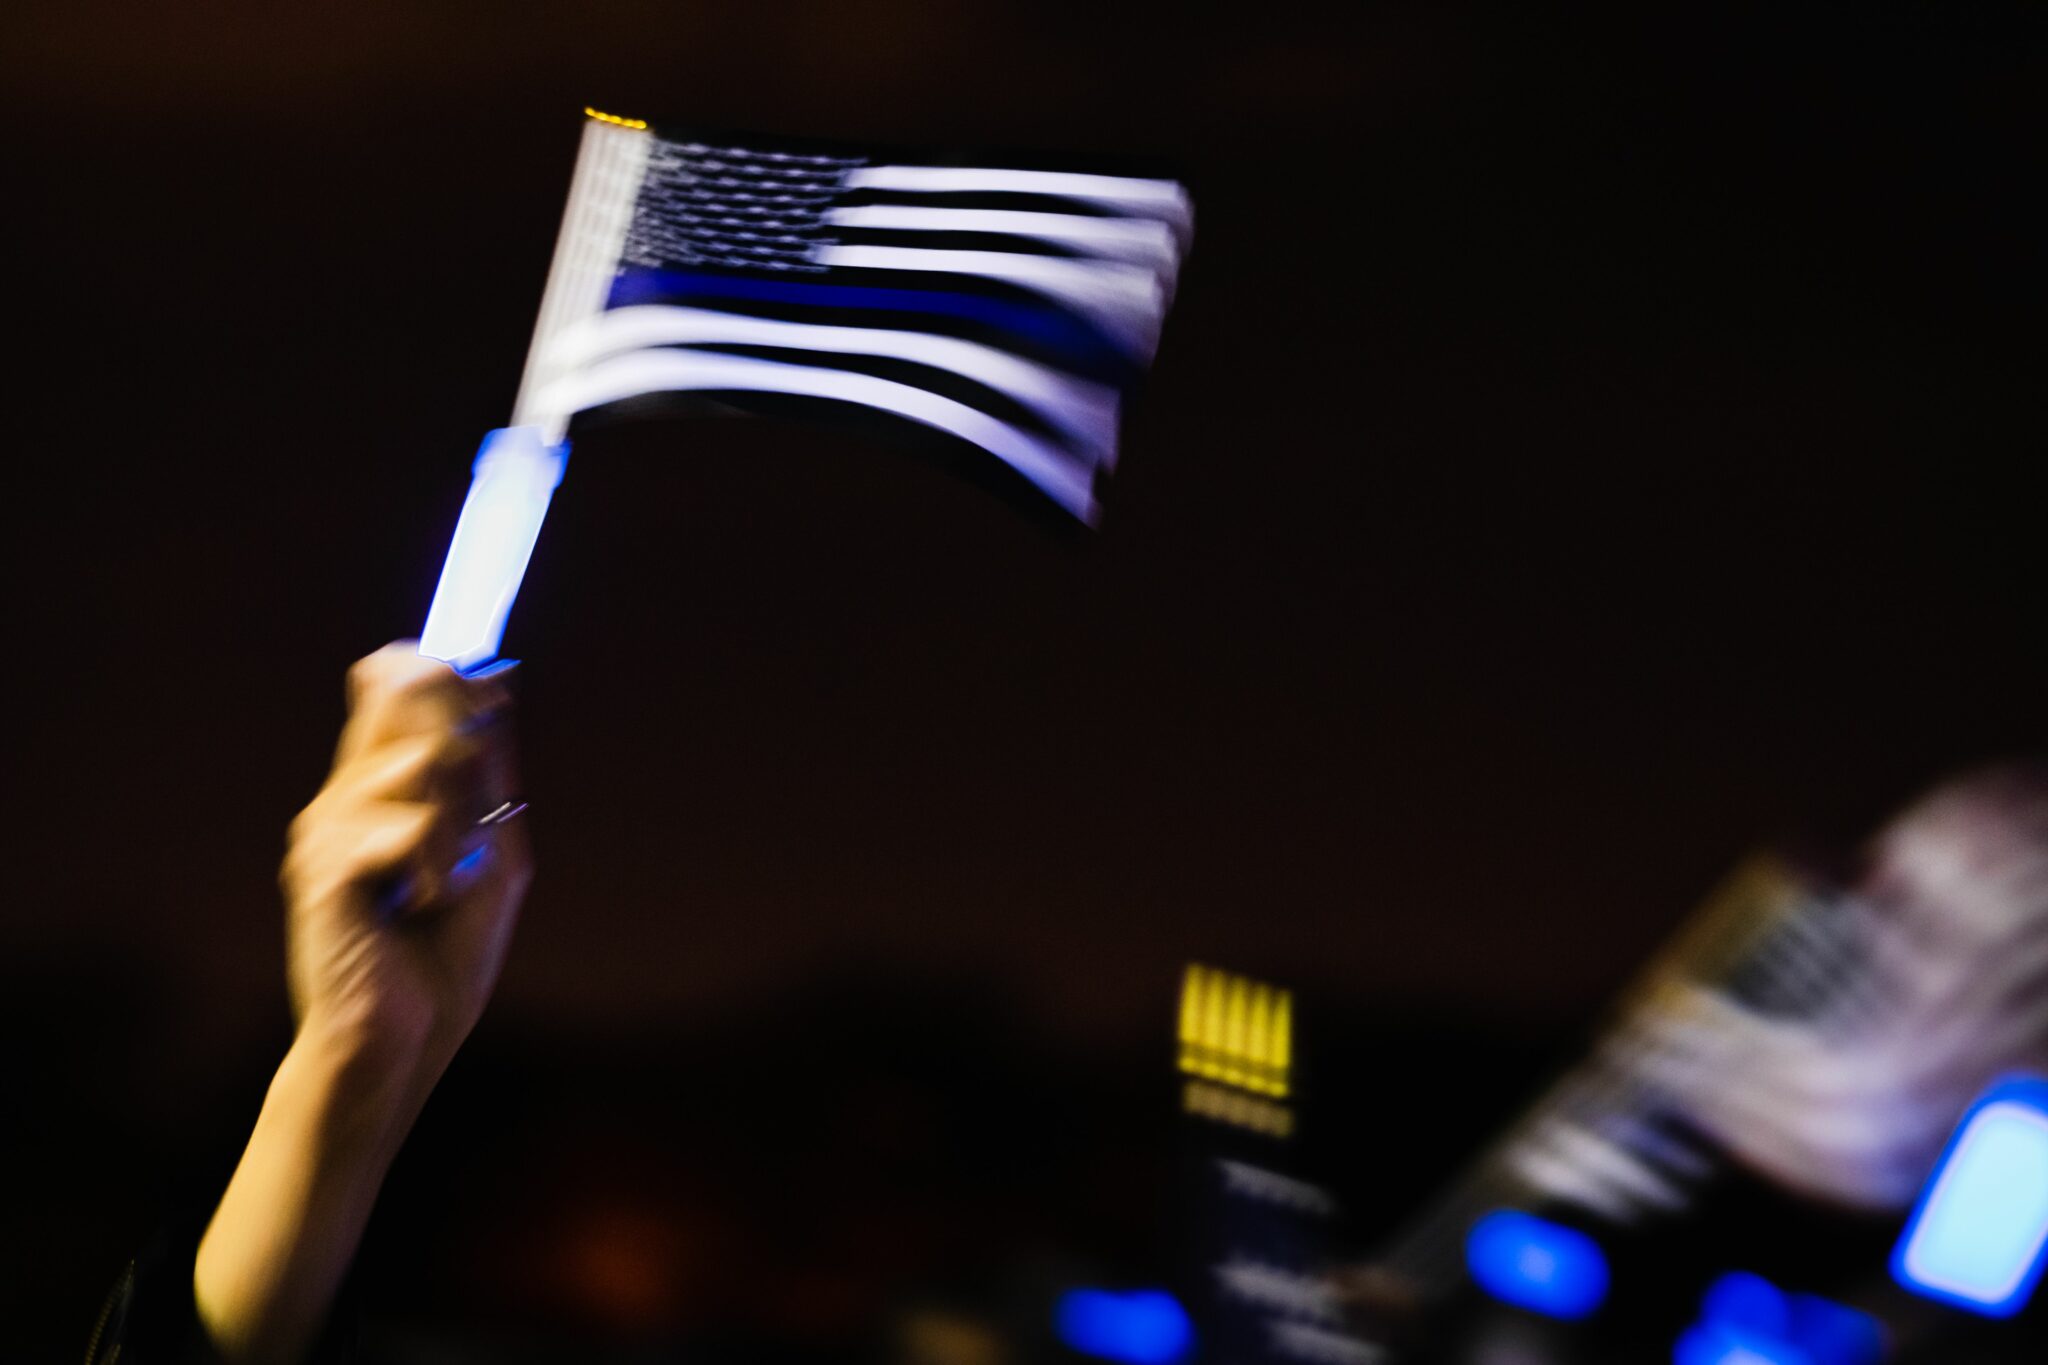 A person waves a thin blue line flag at the United by the Blue Line Vigil organized by the El Paso Police Wives and Family Support Organization at Album Park in El Paso, Texas on November 7, 2020. - Democrat Joe Biden has won the White House, US media said November 7, defeating Donald Trump and ending a presidency that convulsed American politics, shocked the world and left the United States more divided than at any time in decades. (Photo by Justin HAMEL / AFP) (Photo by JUSTIN HAMEL/AFP via Getty Images)